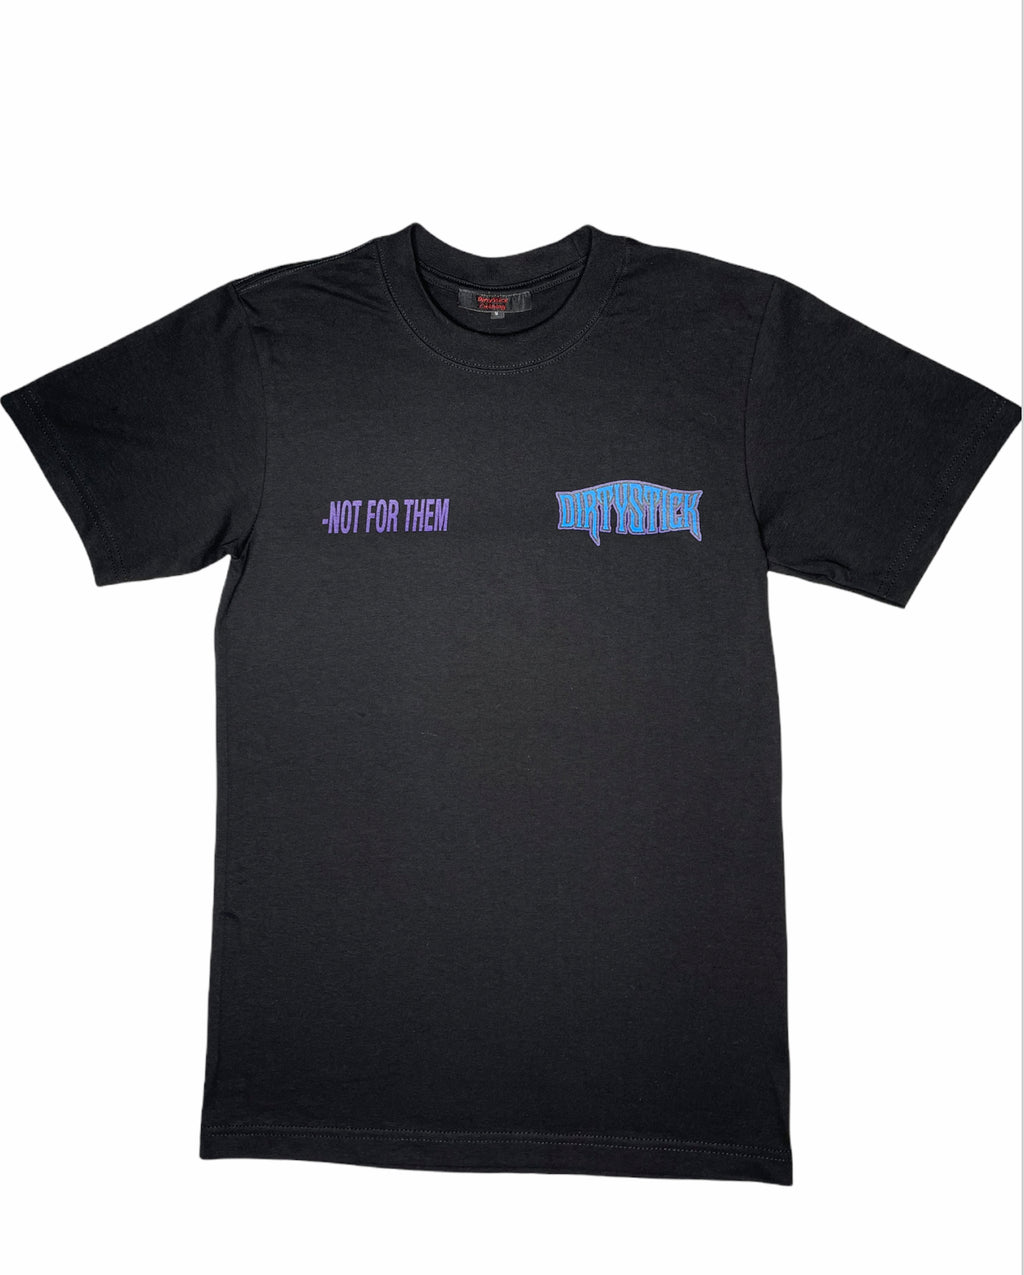 T-Shirt/Not For Them 3/Blk/Blu/Pur